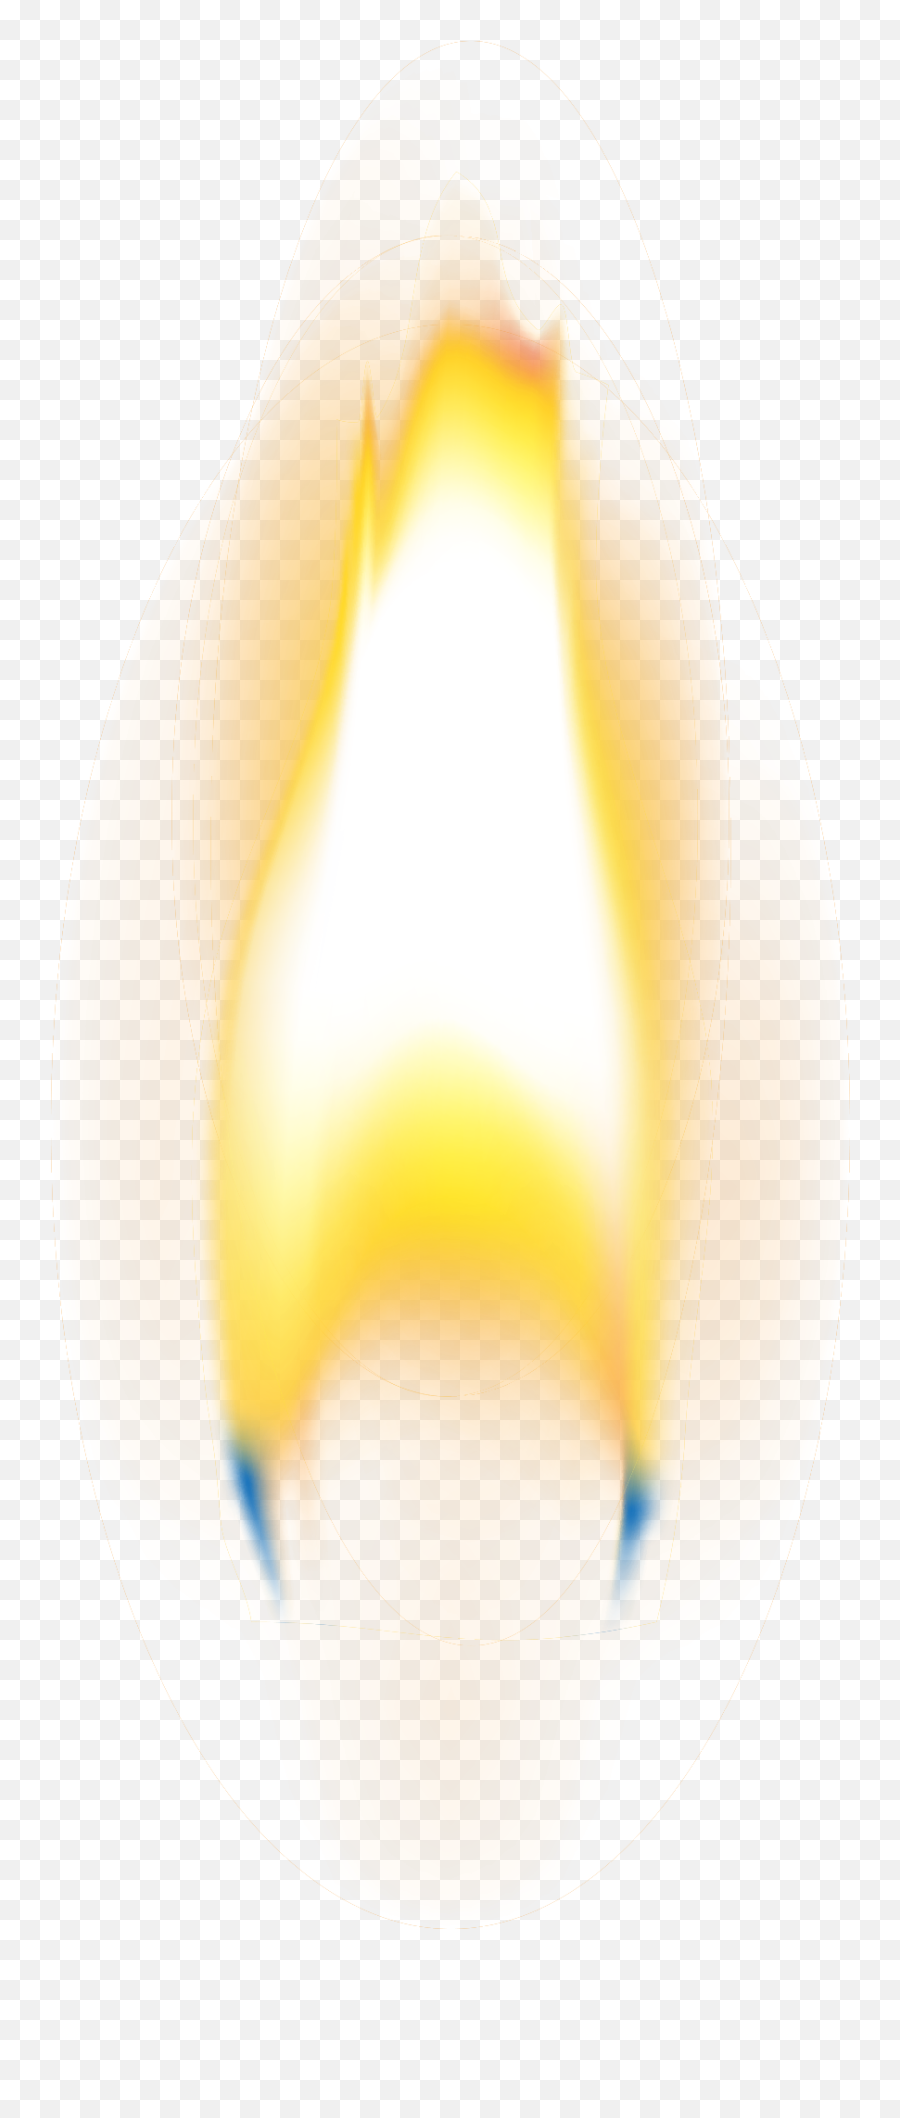 Candle Flame Png Hd Candle Flame Png Image Free Download - Solid Emoji,Flame Png